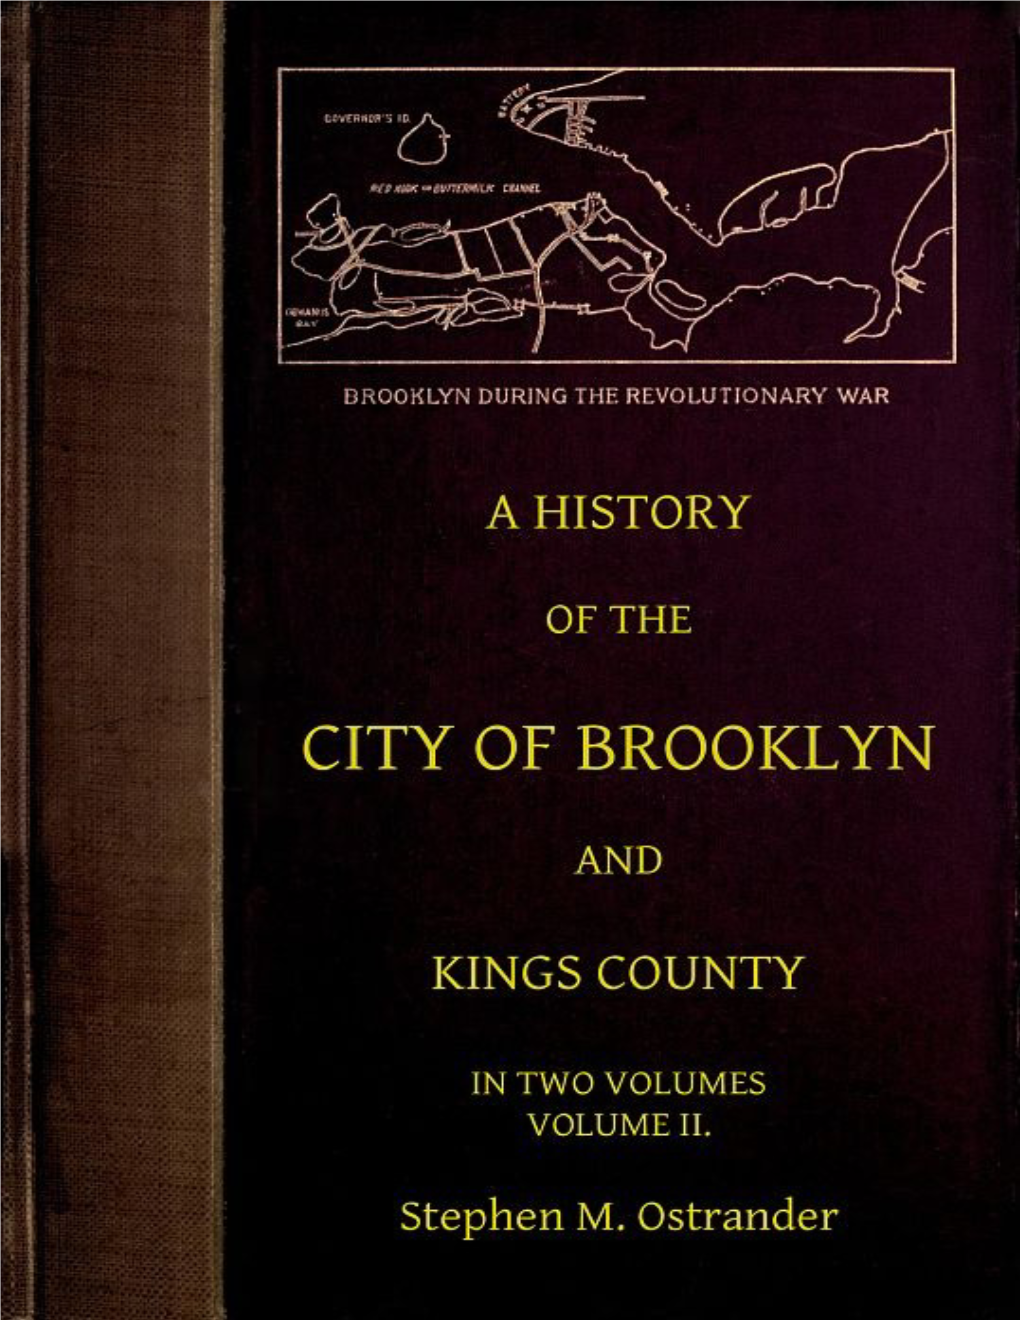 A History of the City of Brooklyn and Kings County Volume II, by Stephen M